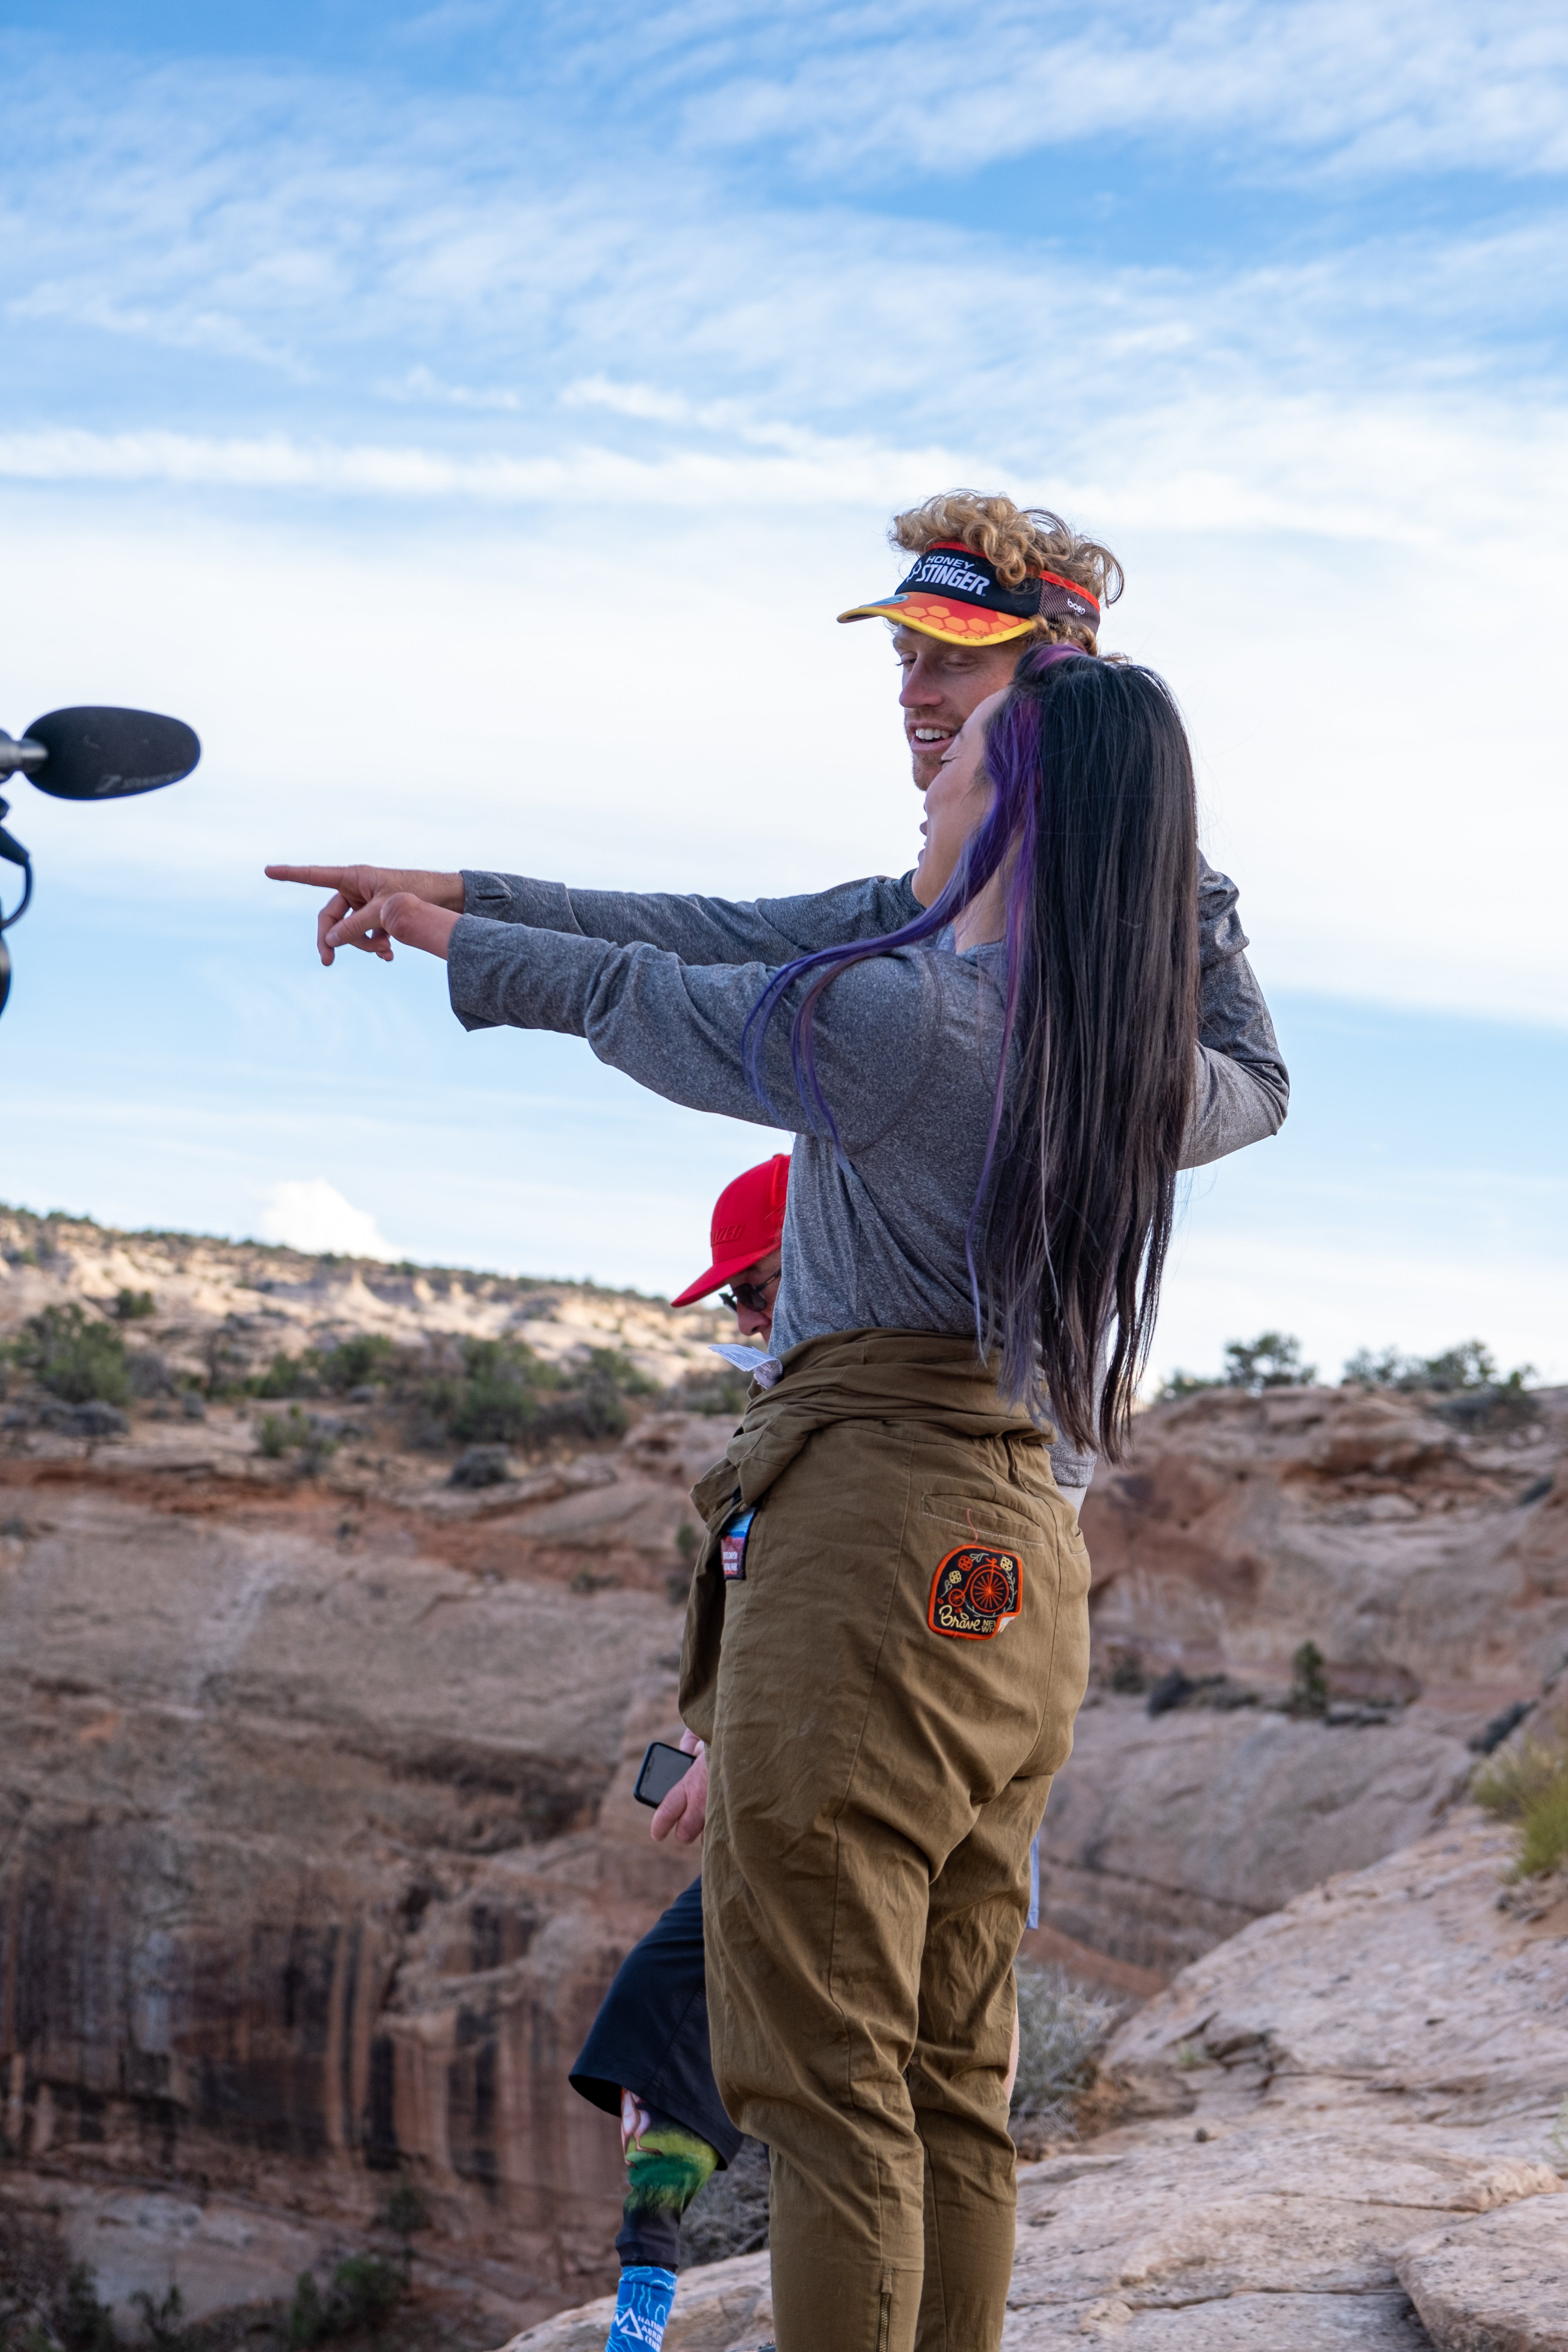 Josie and Taylor stand at the top edge of the Shafer climb in Canyonlands National Park with Roger in the background. Josie visualizes the finish line and points with her left residual limb while Taylor points with his right hand; their pointing converges making it seem like Taylor’s right hand could be Josie’s left hand upon first glance.  Photo credit: Matt Didisheim https://www.instagram.com/didisheim/